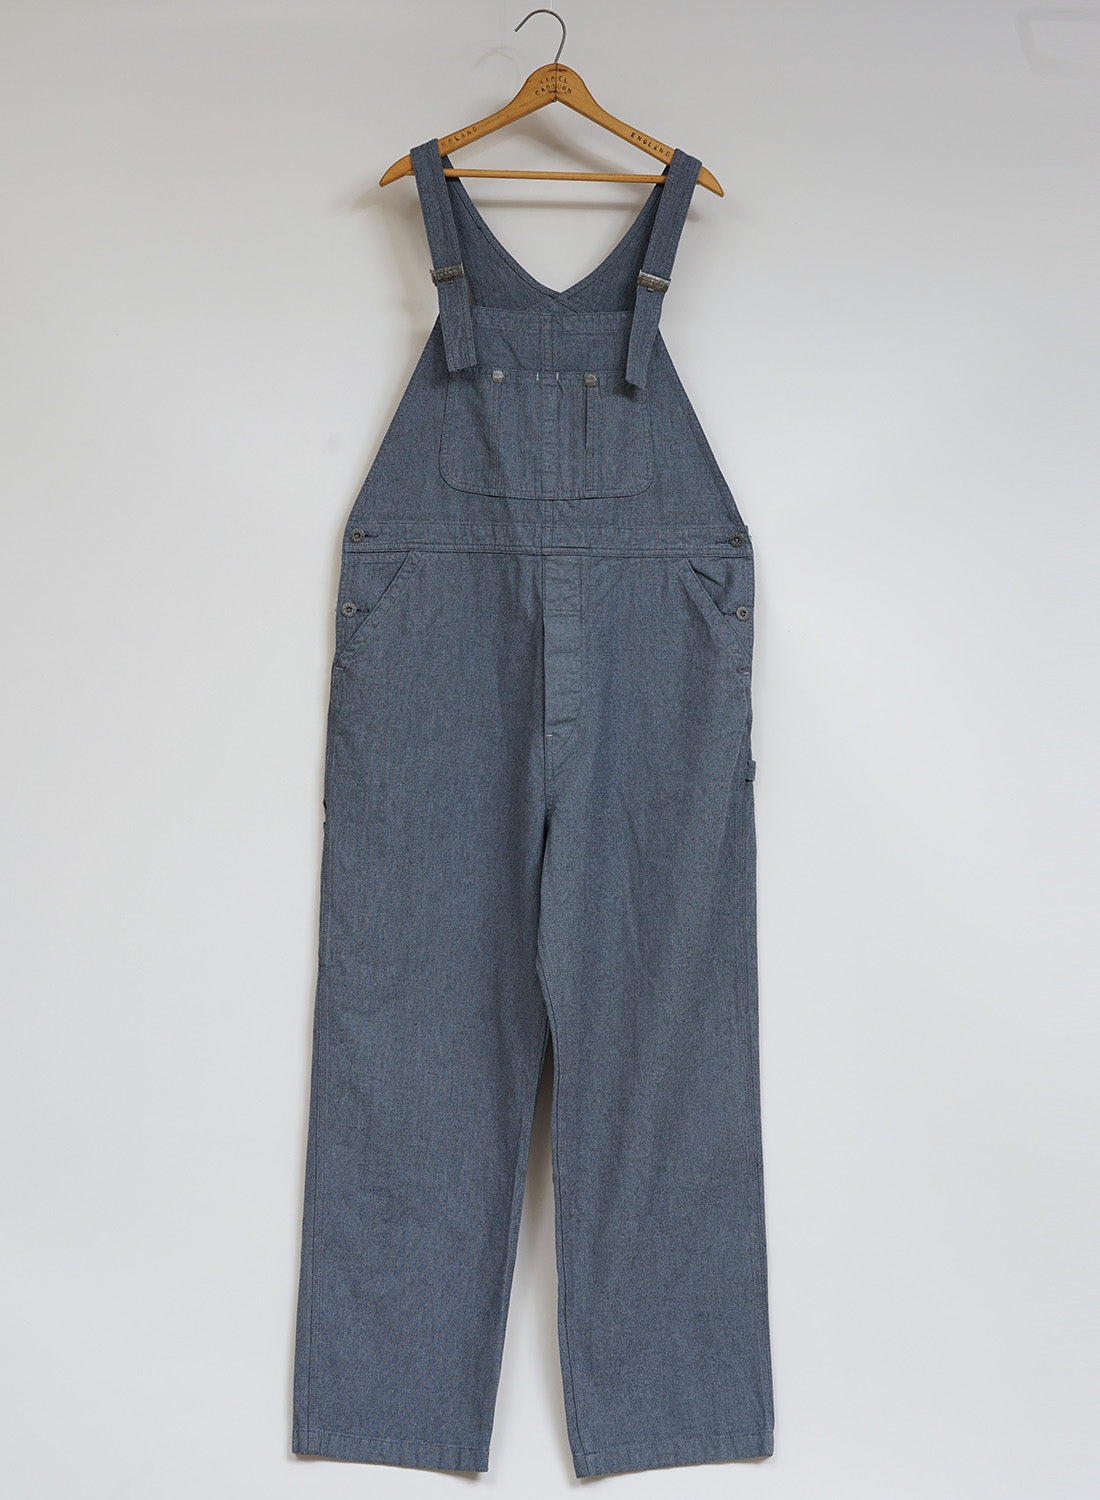 New Dungaree Broken Twill in Washed Blue - 1